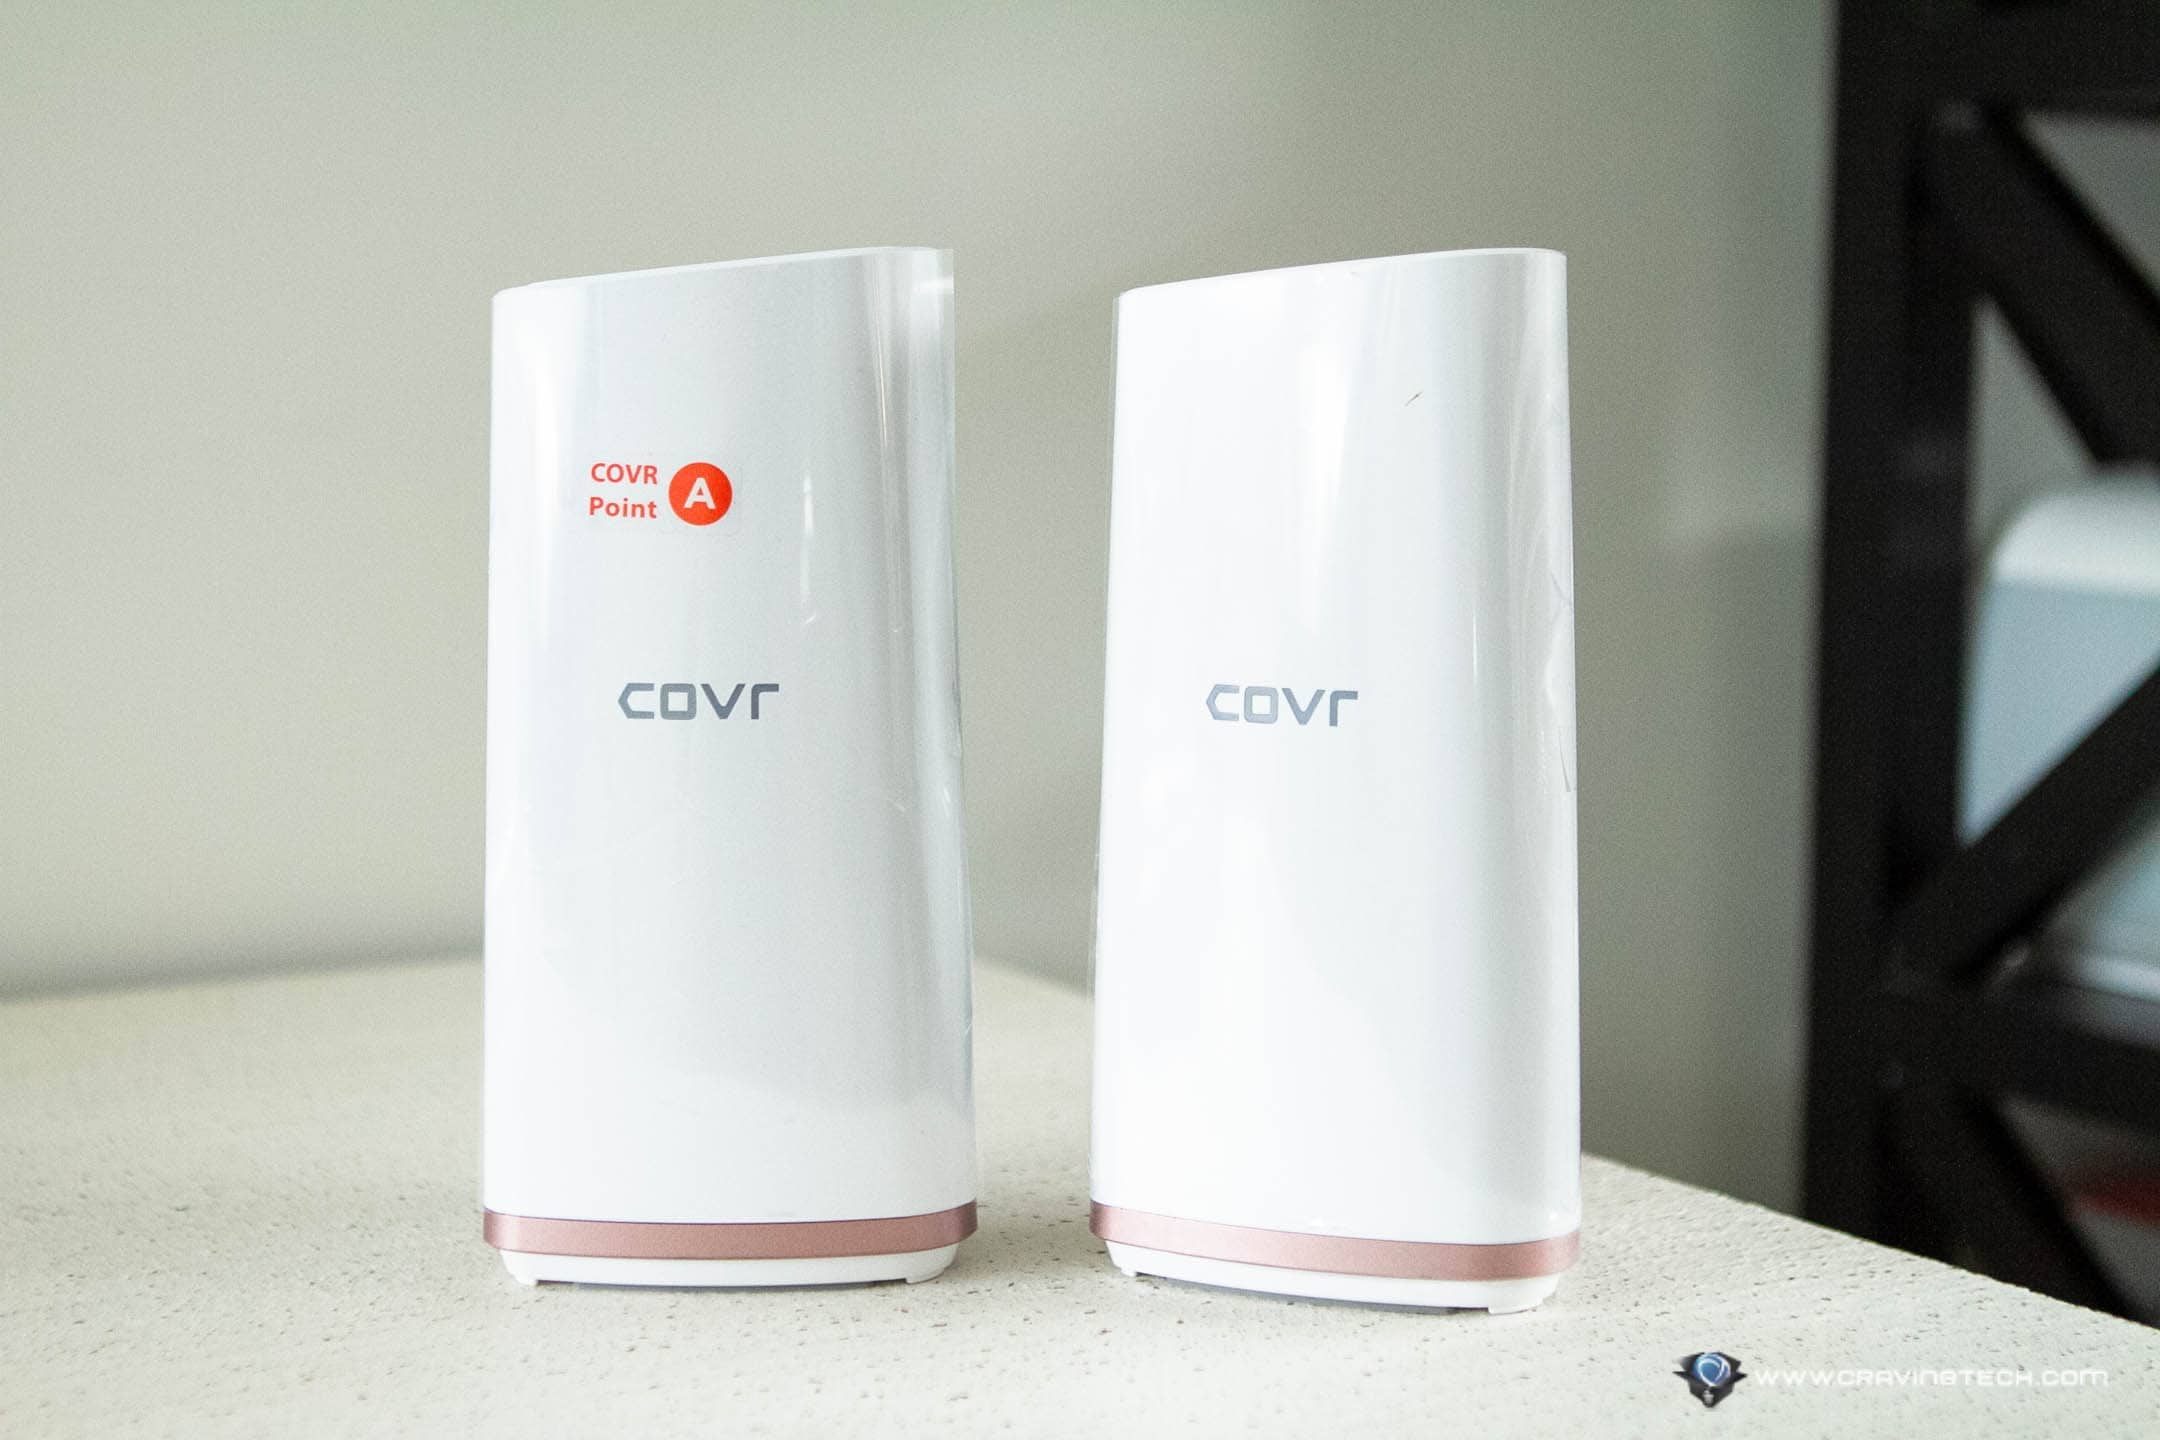 D-Link COVR-2022 mesh router now comes with McAfee smart protection & one of the best parental controls out there